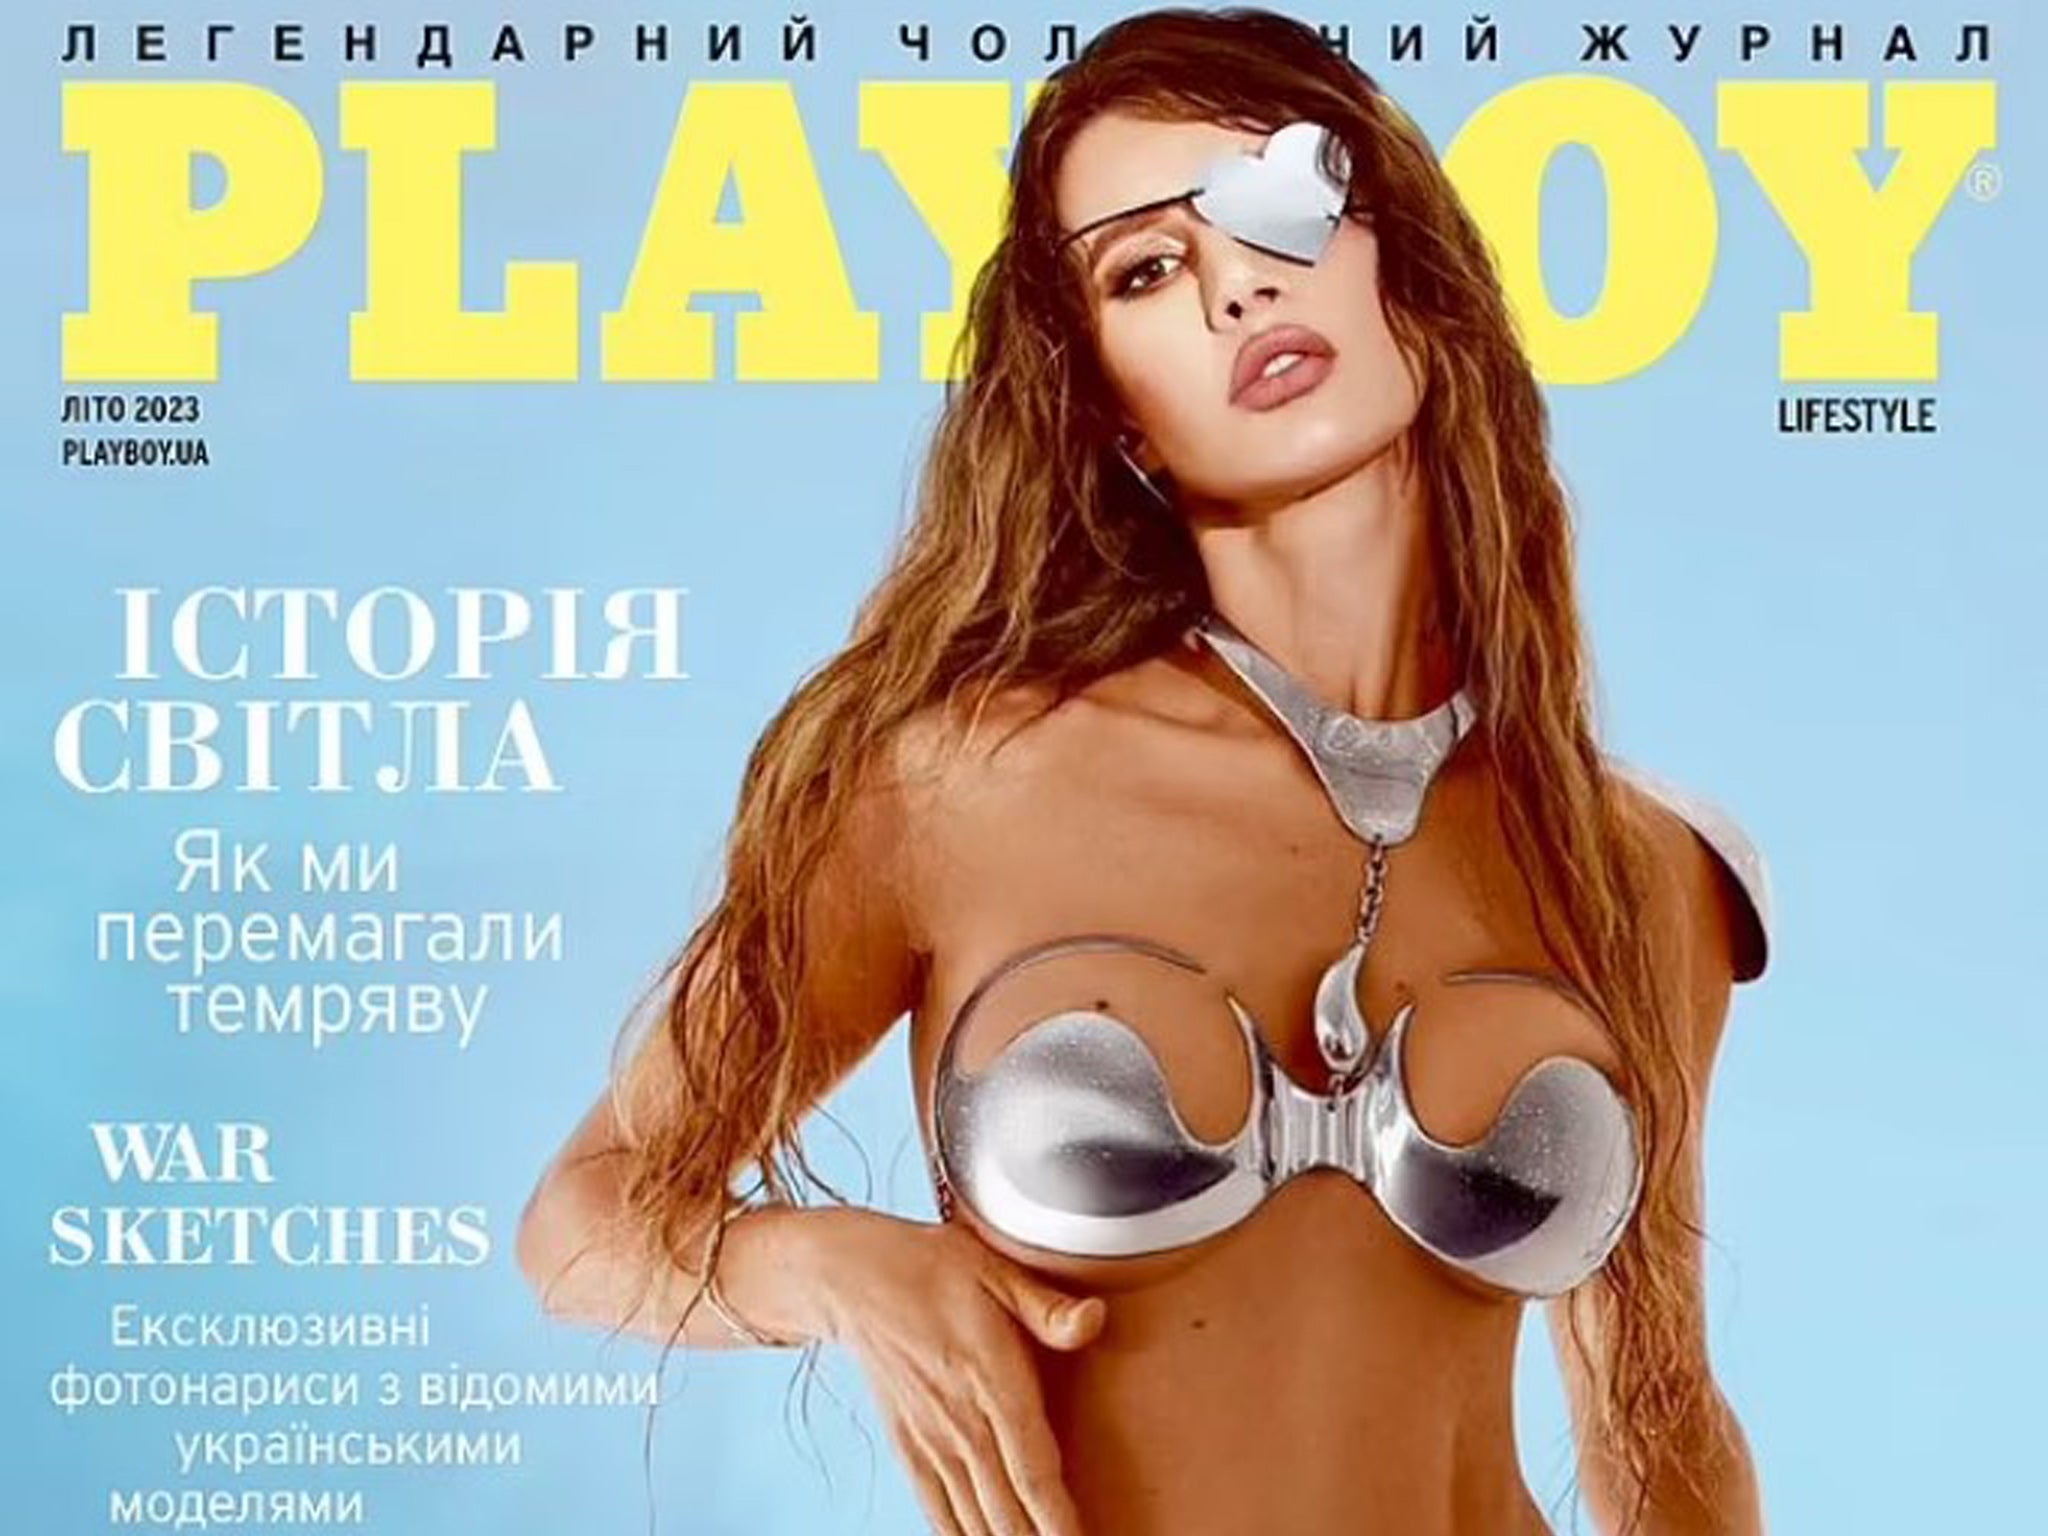 Iryna Bilotserkovets Ukrainian mother who lost an eye in attempted assassination is Playboy cover star The Independent